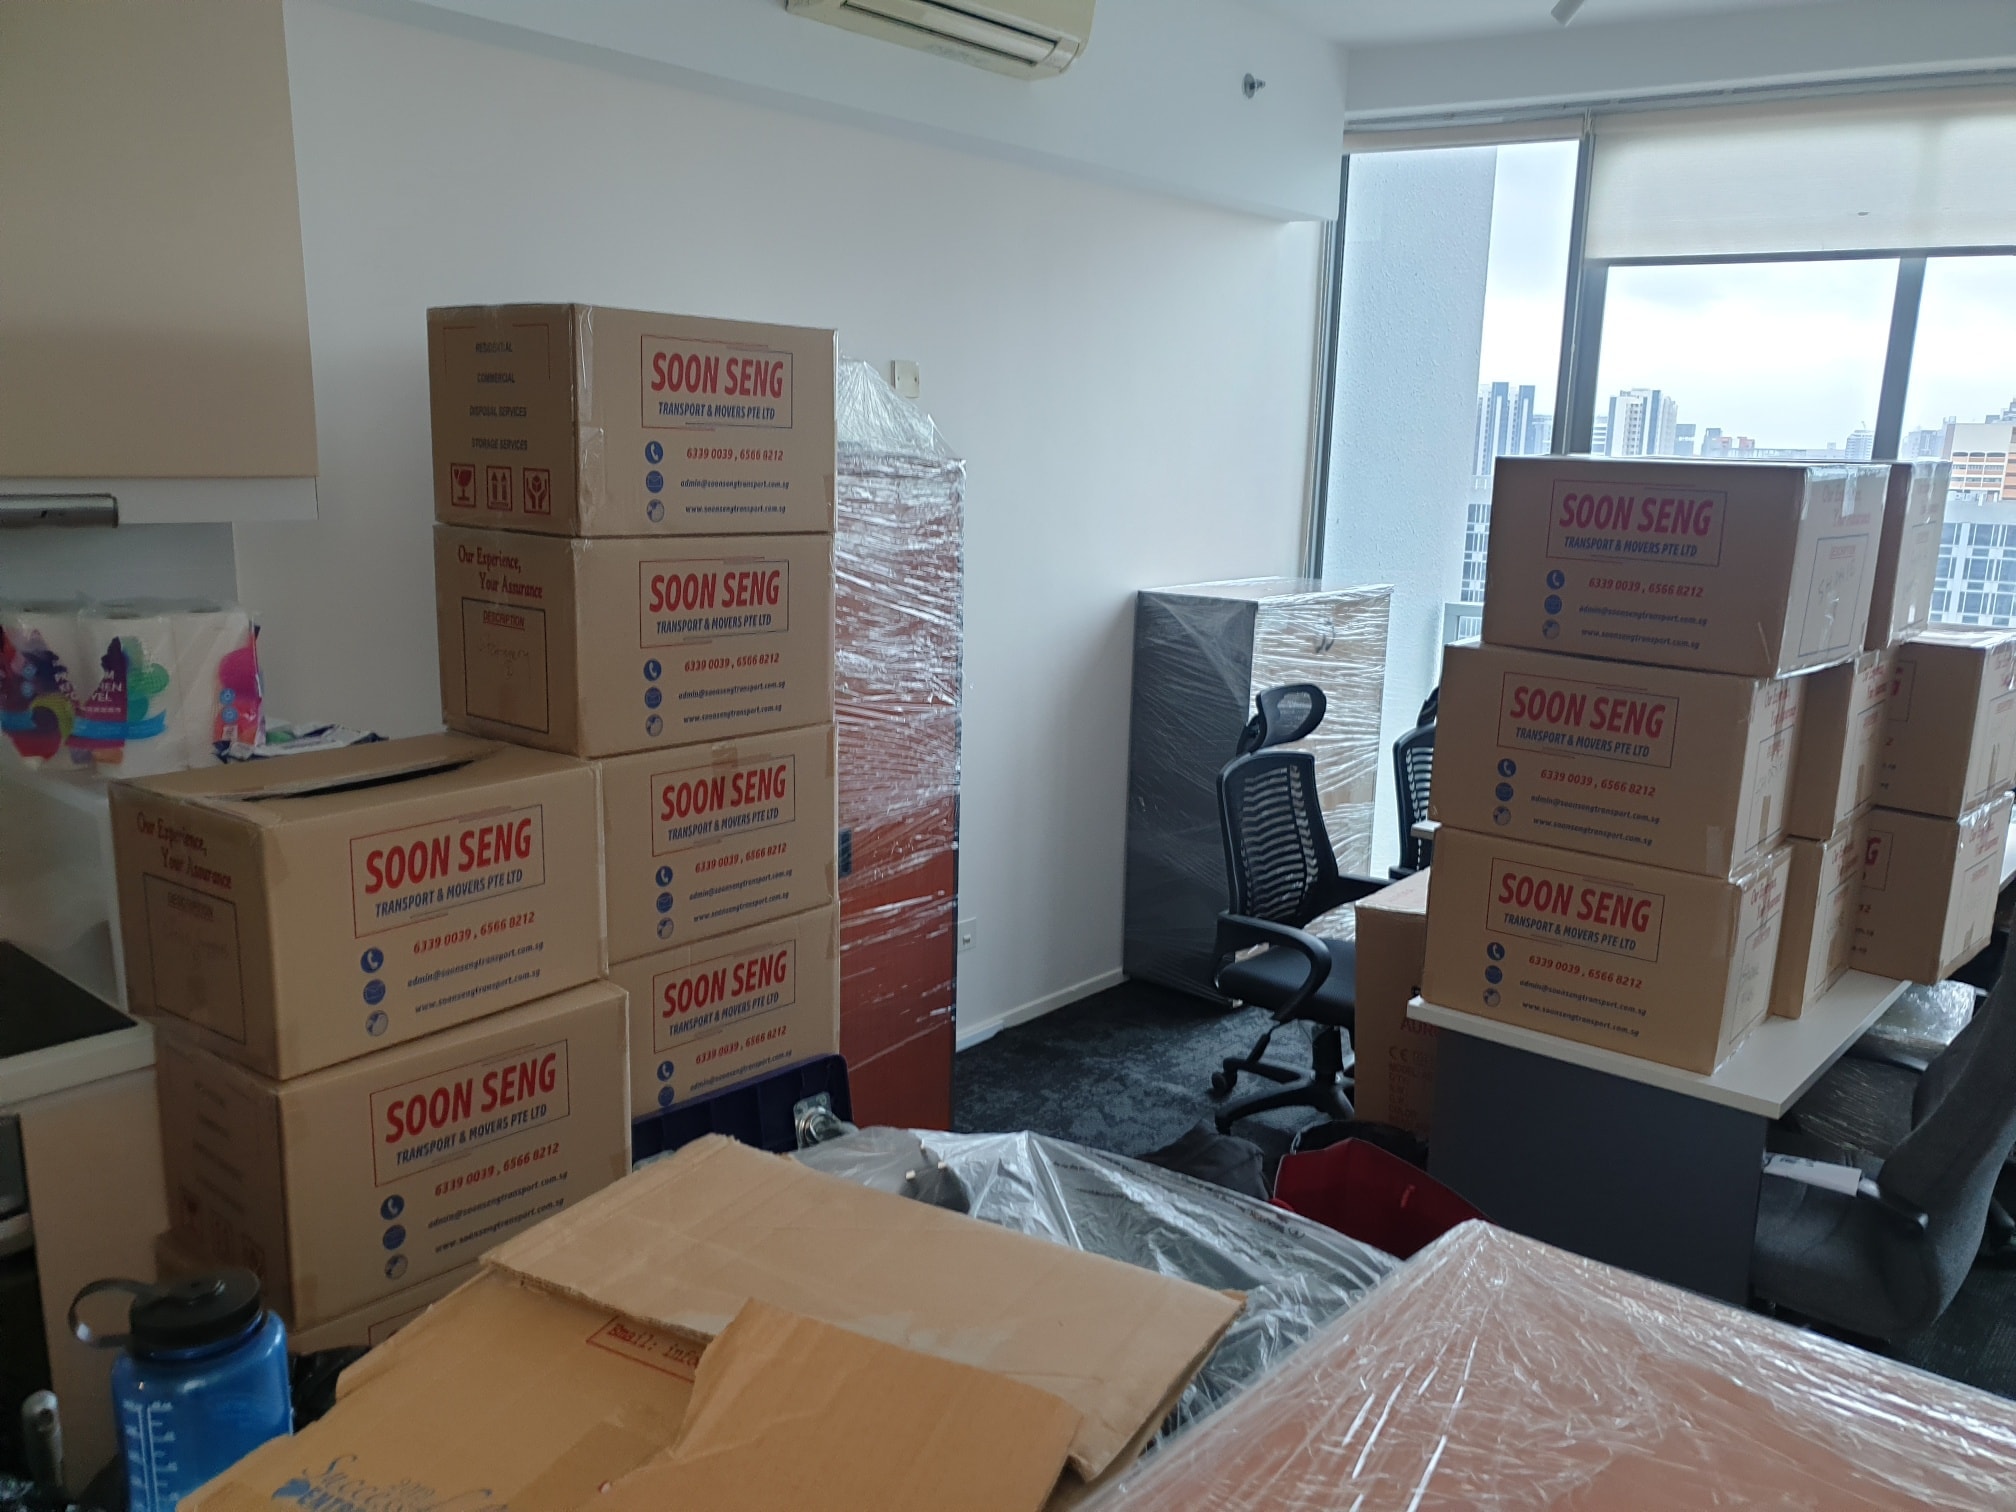 Relocating Office Items In Boxes